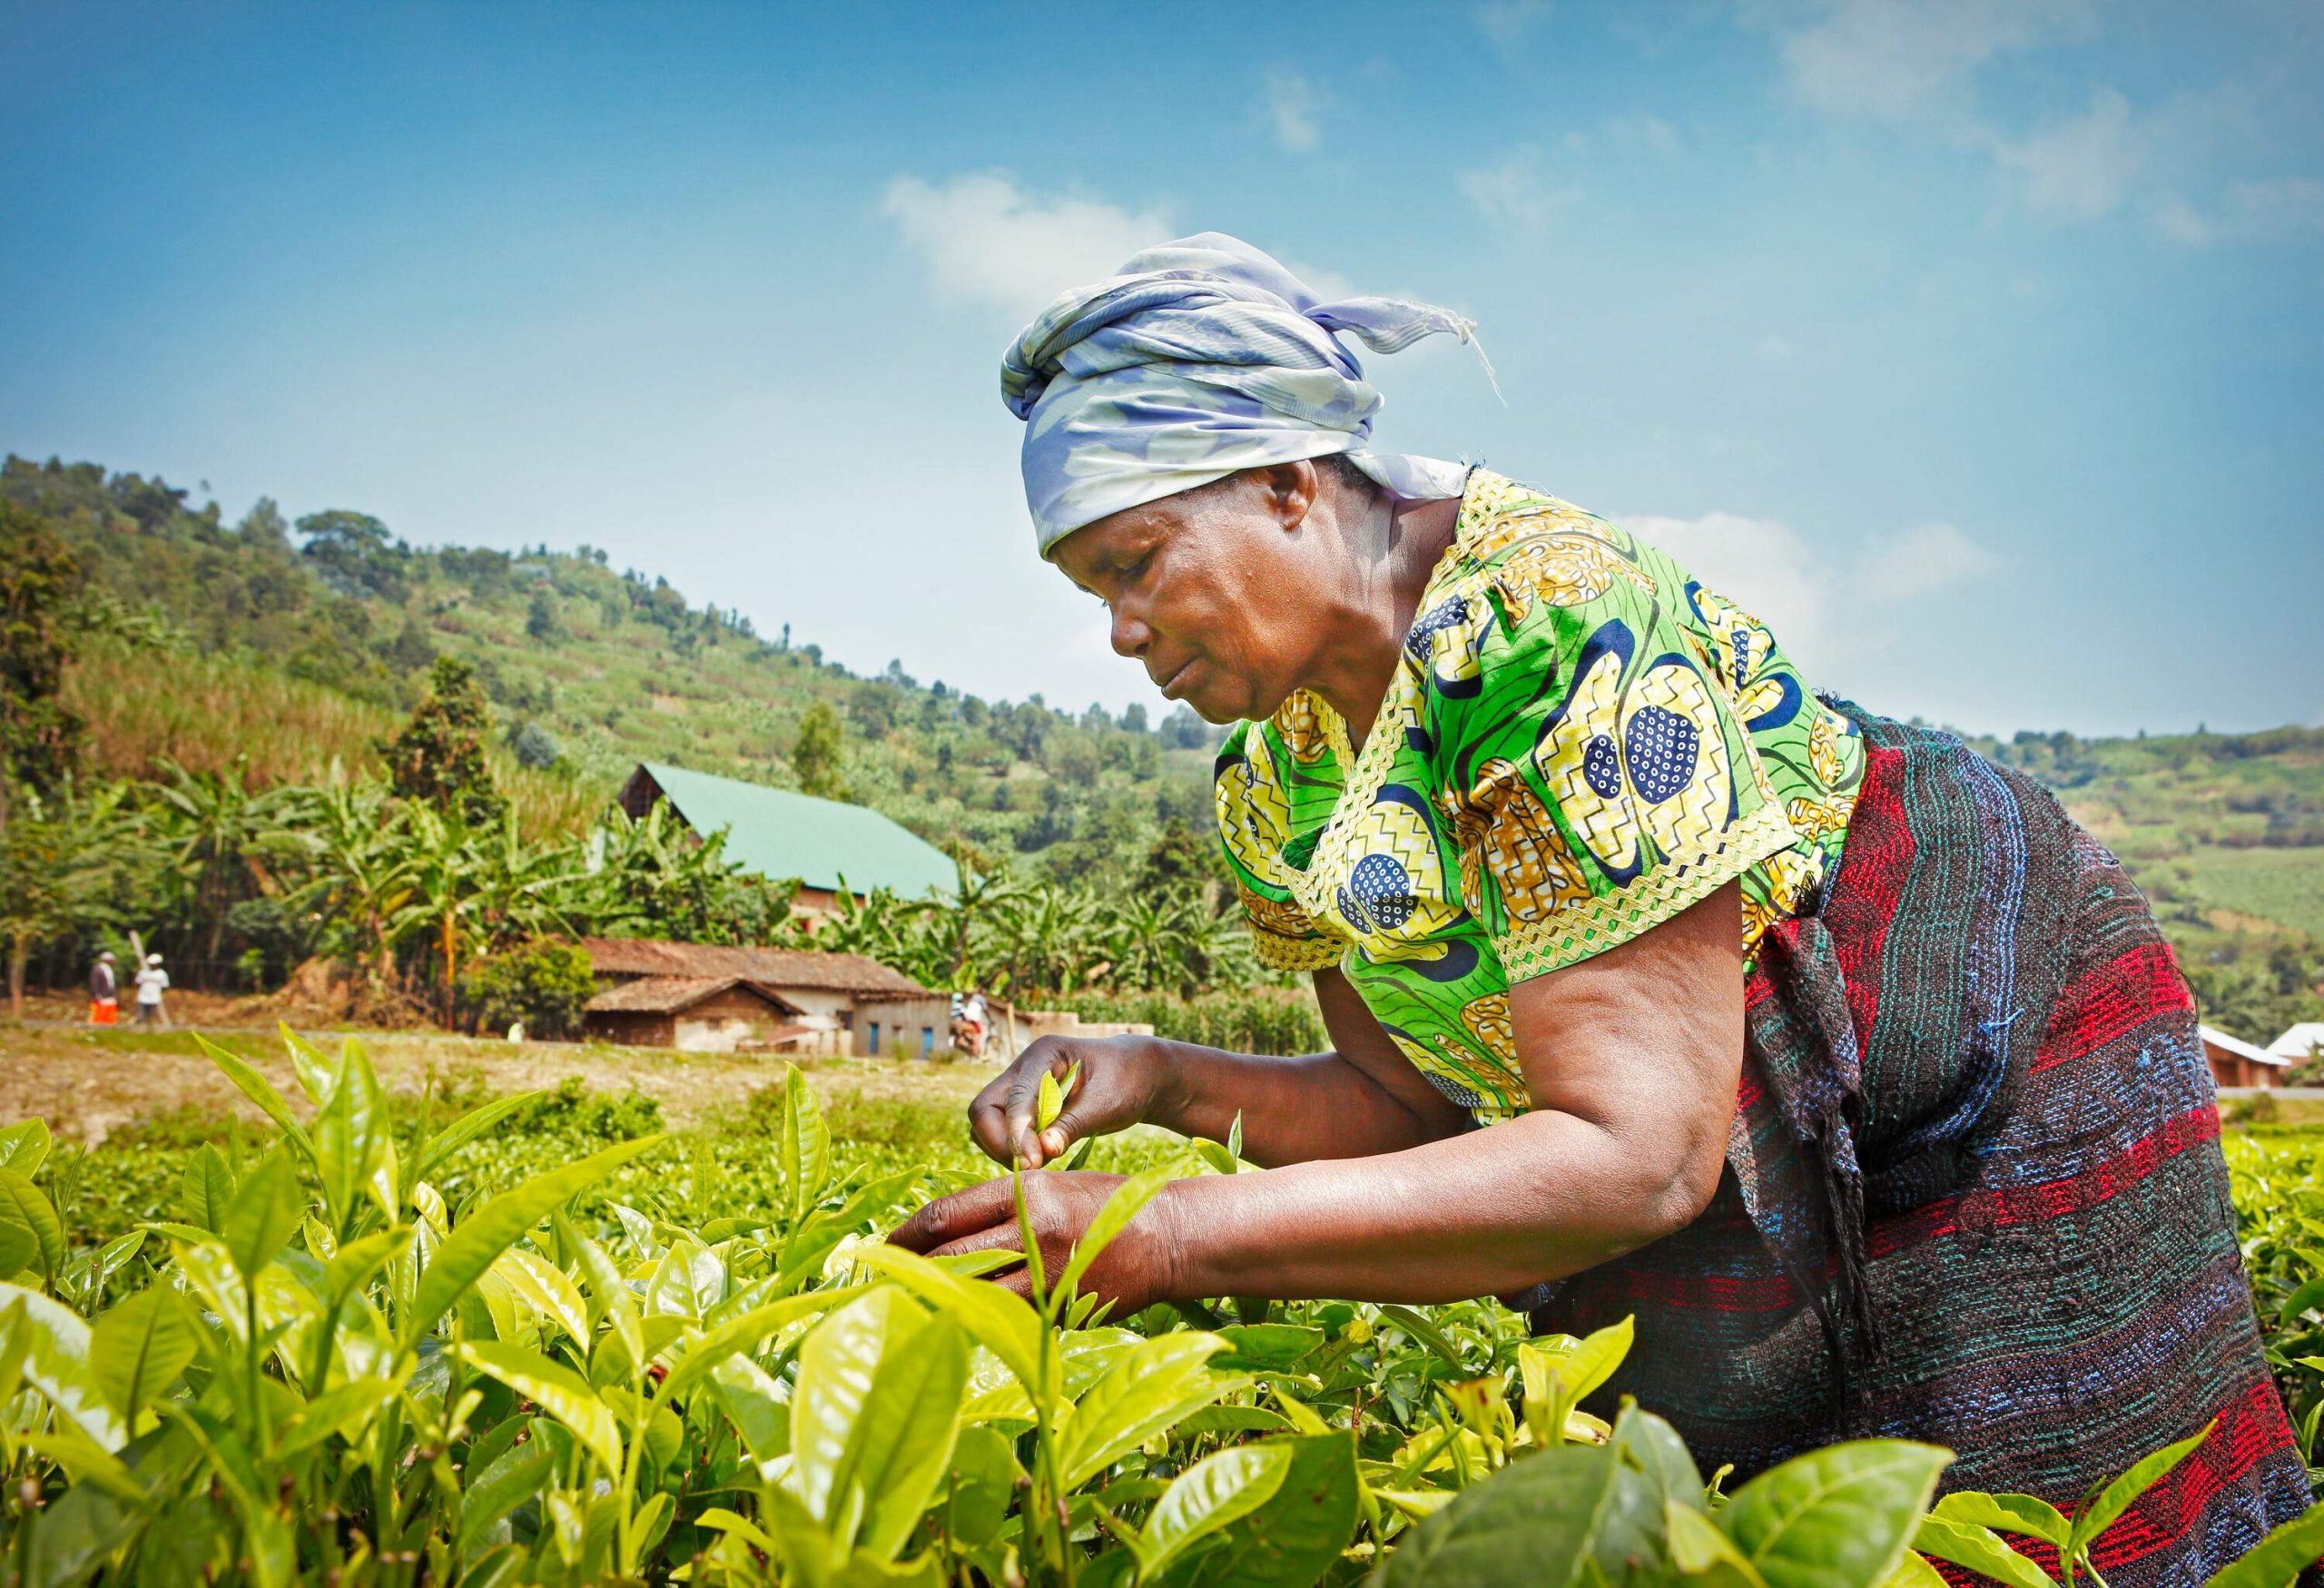 An African woman in traditional clothing, picking up fresh tea leaves at a tea plantation.